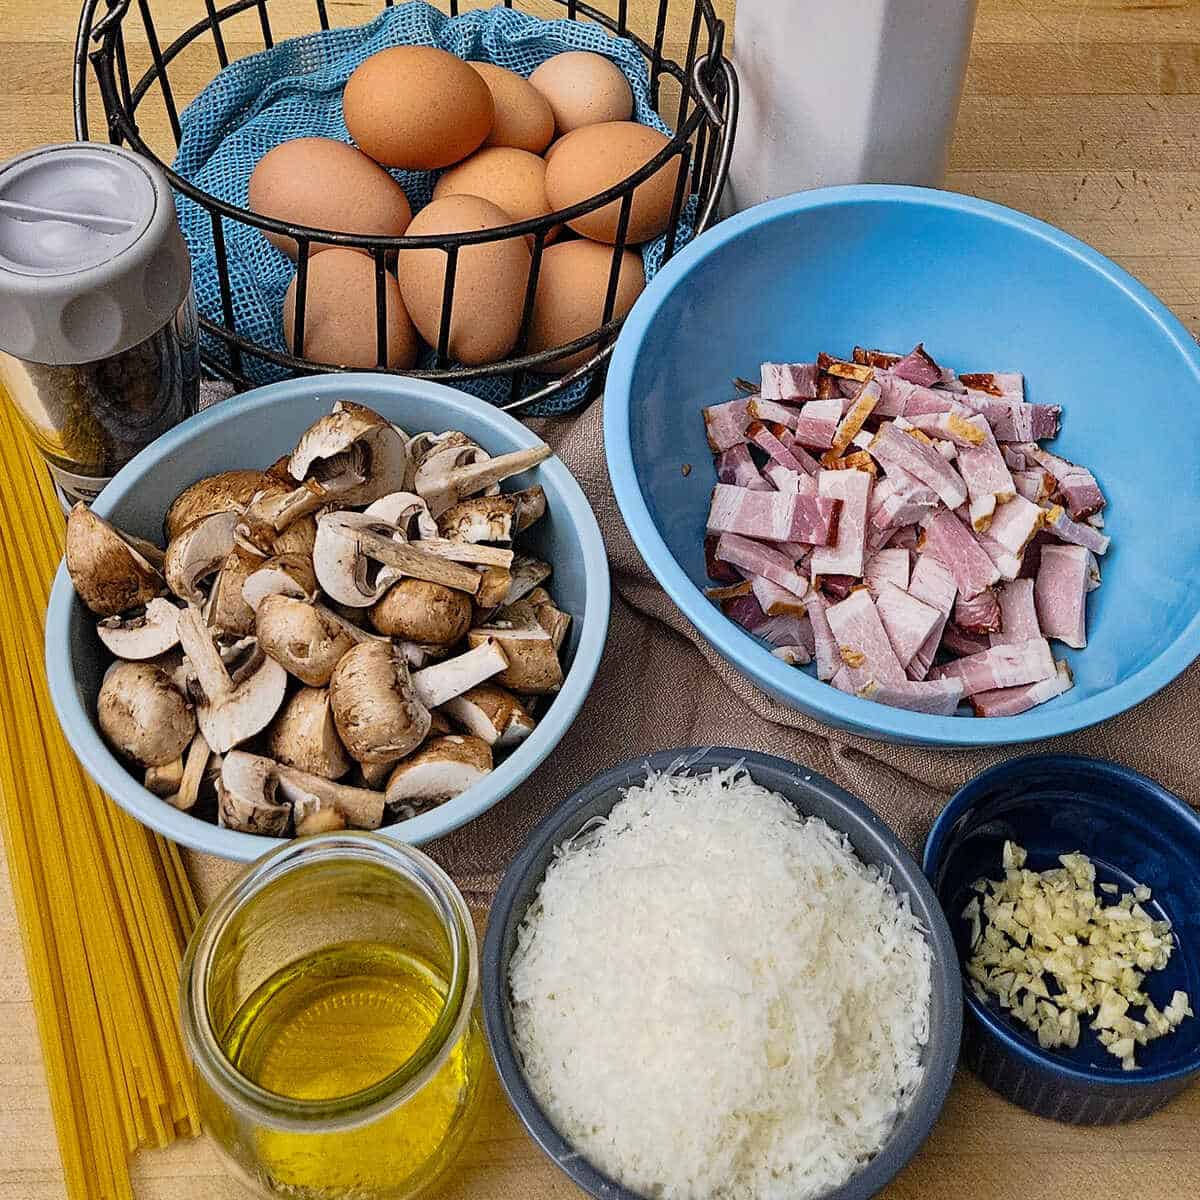 the ingredients for pasta carbonara with mushrooms